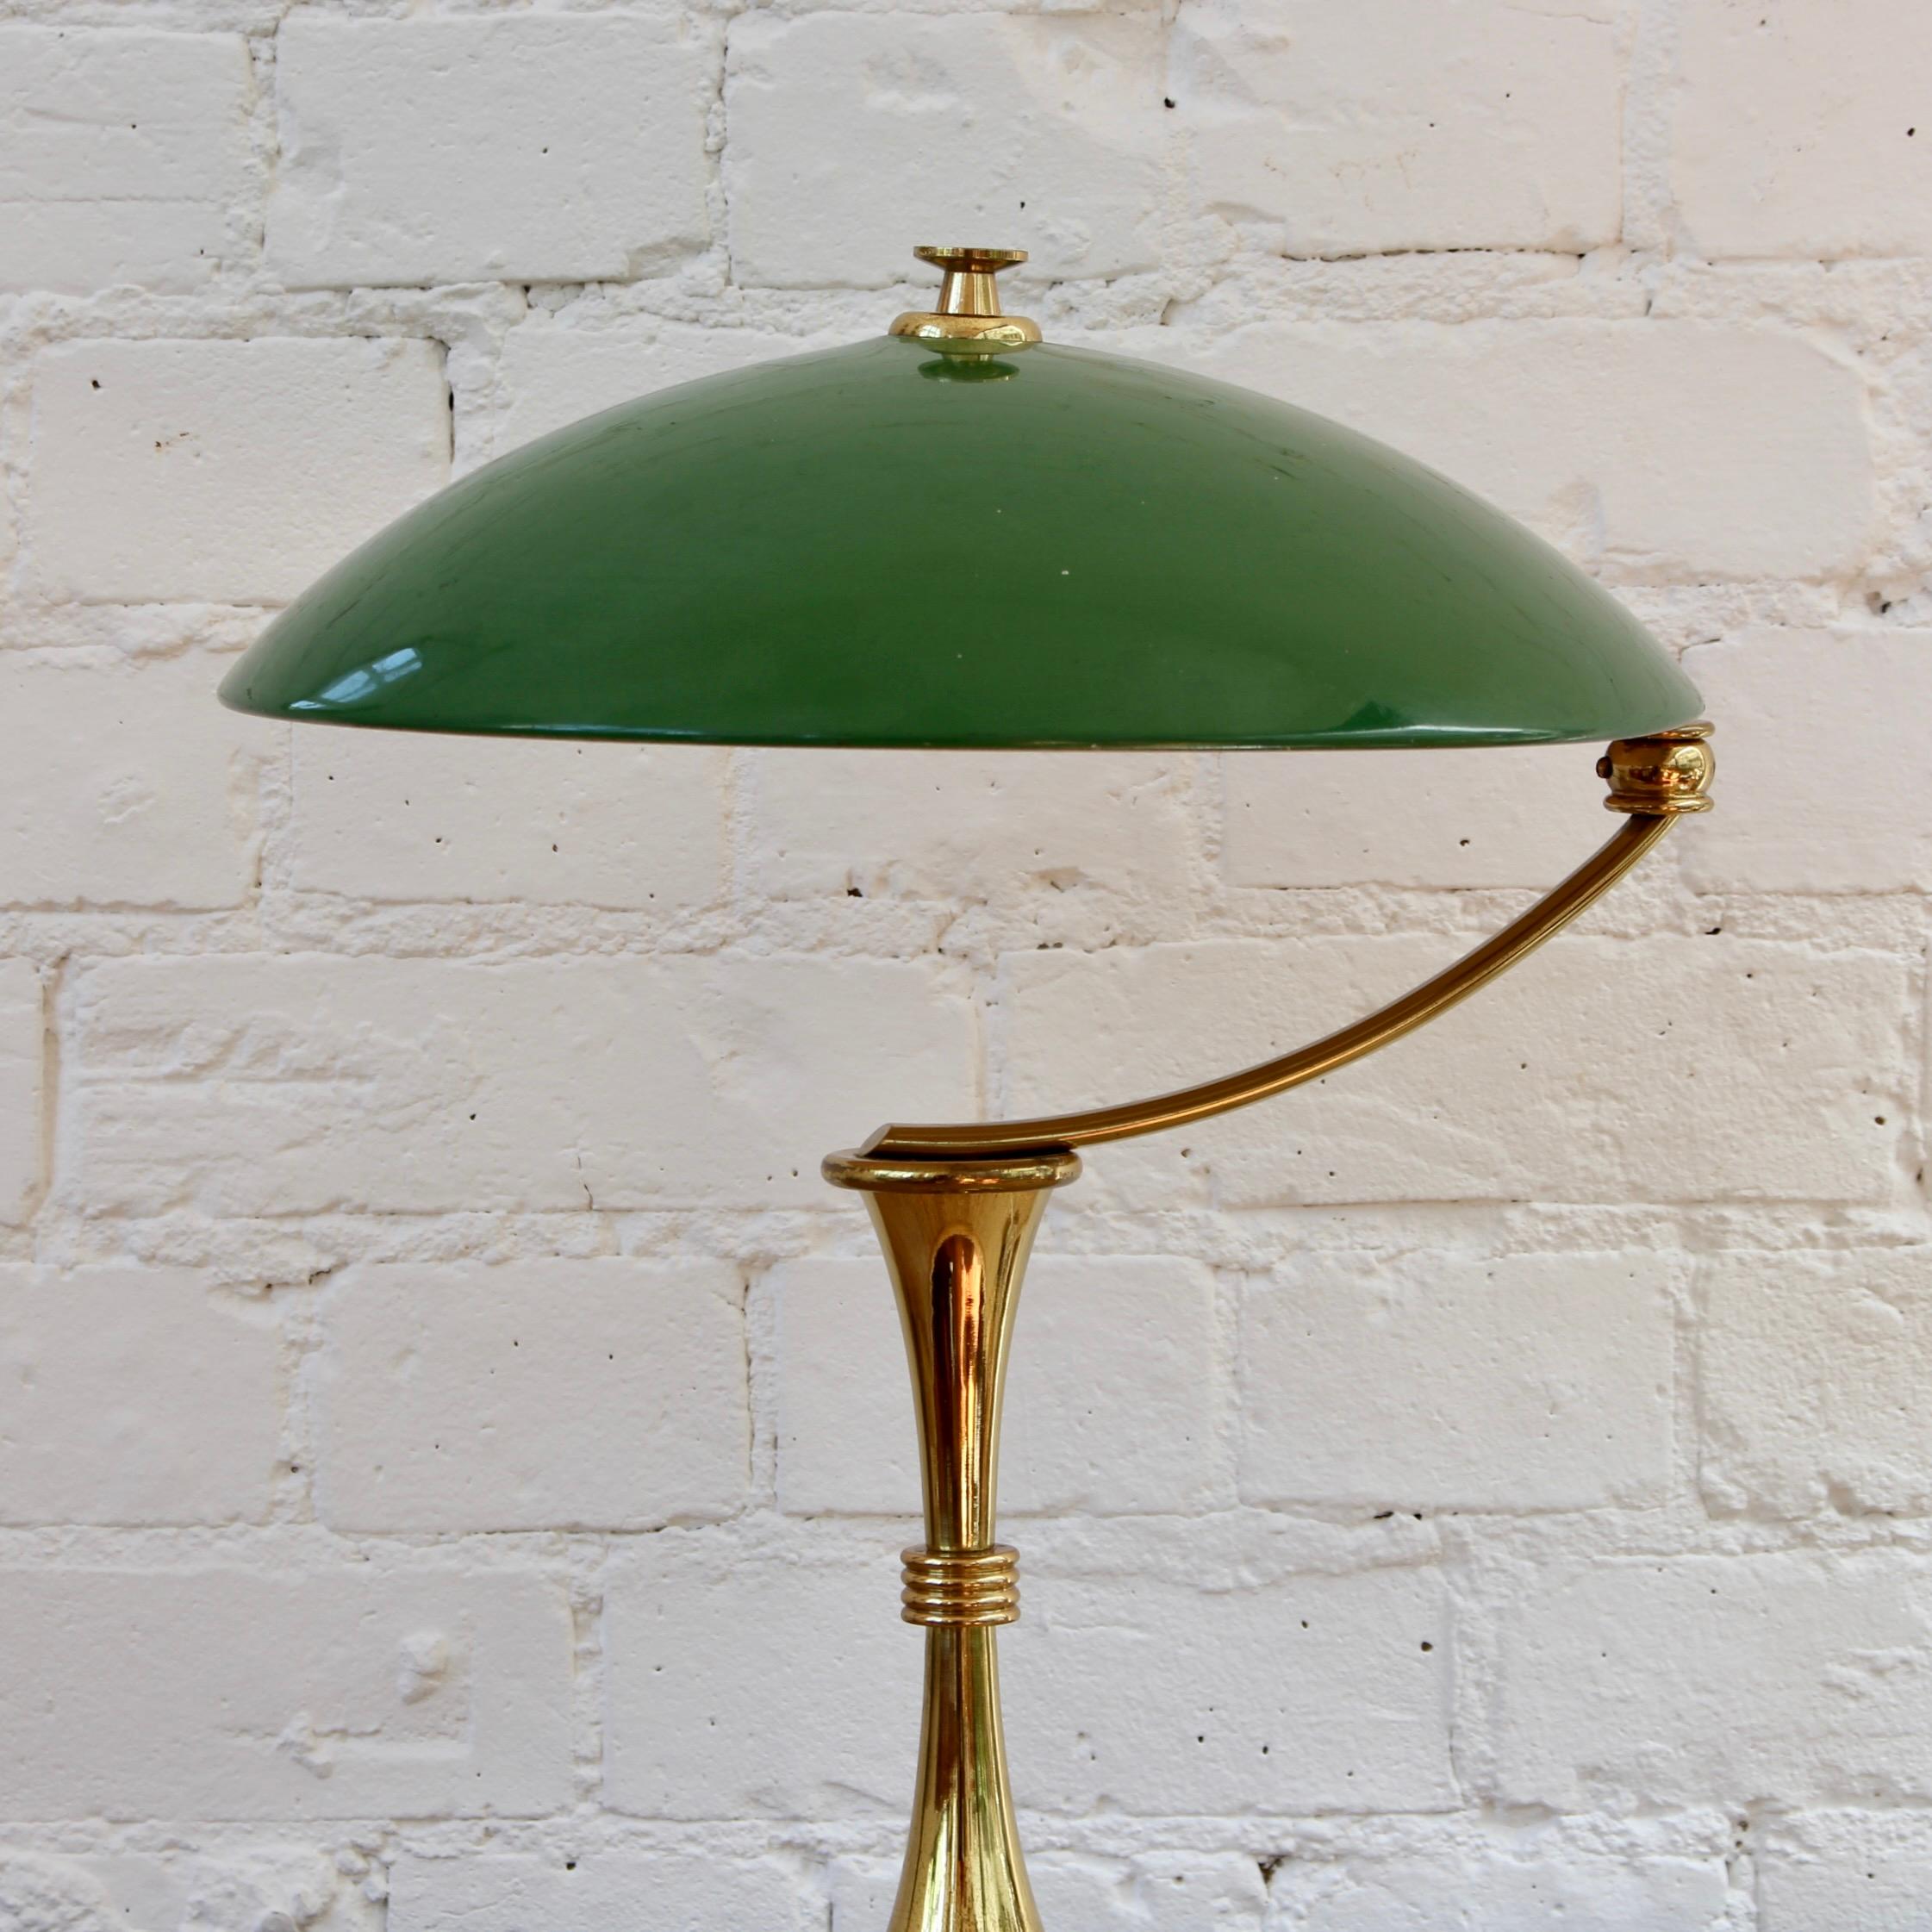 Italian Mid-Century Brass-Covered Desk Lamp with Green Shade 'circa 1950s' For Sale 9